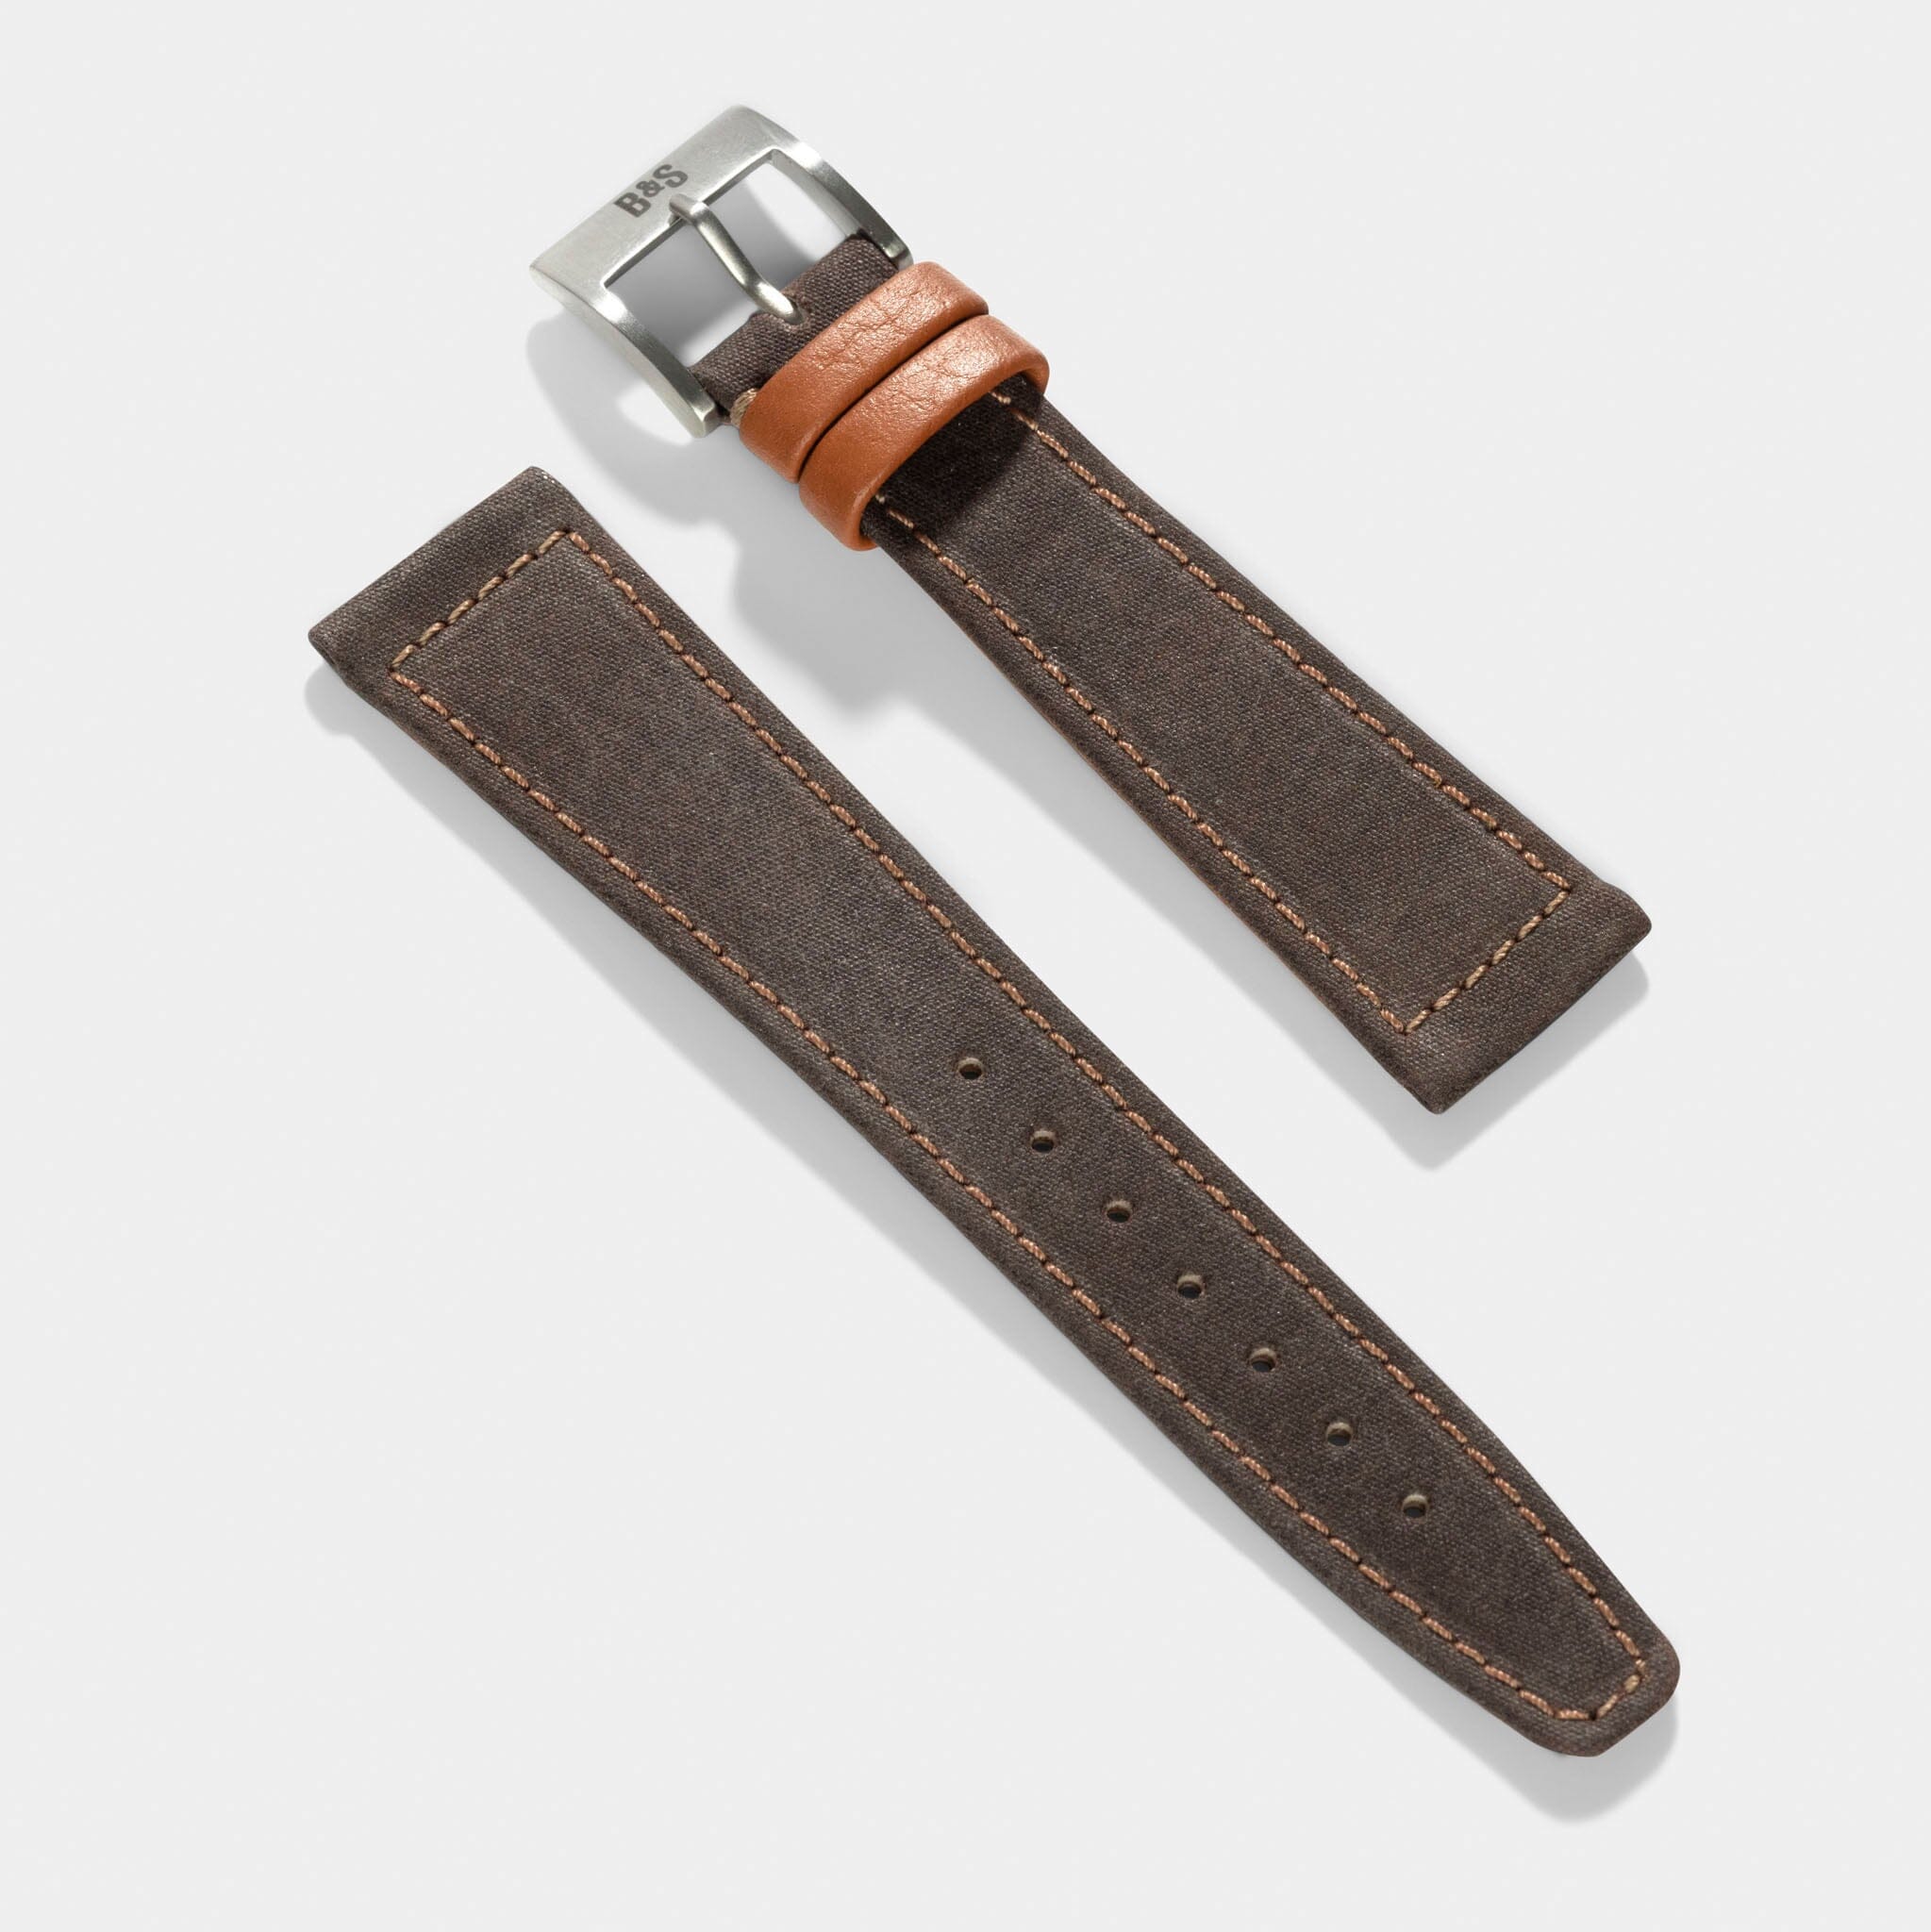 The Manchester Watch Strap - Made of Vintage Barbour Fabric - Jubilee Edition